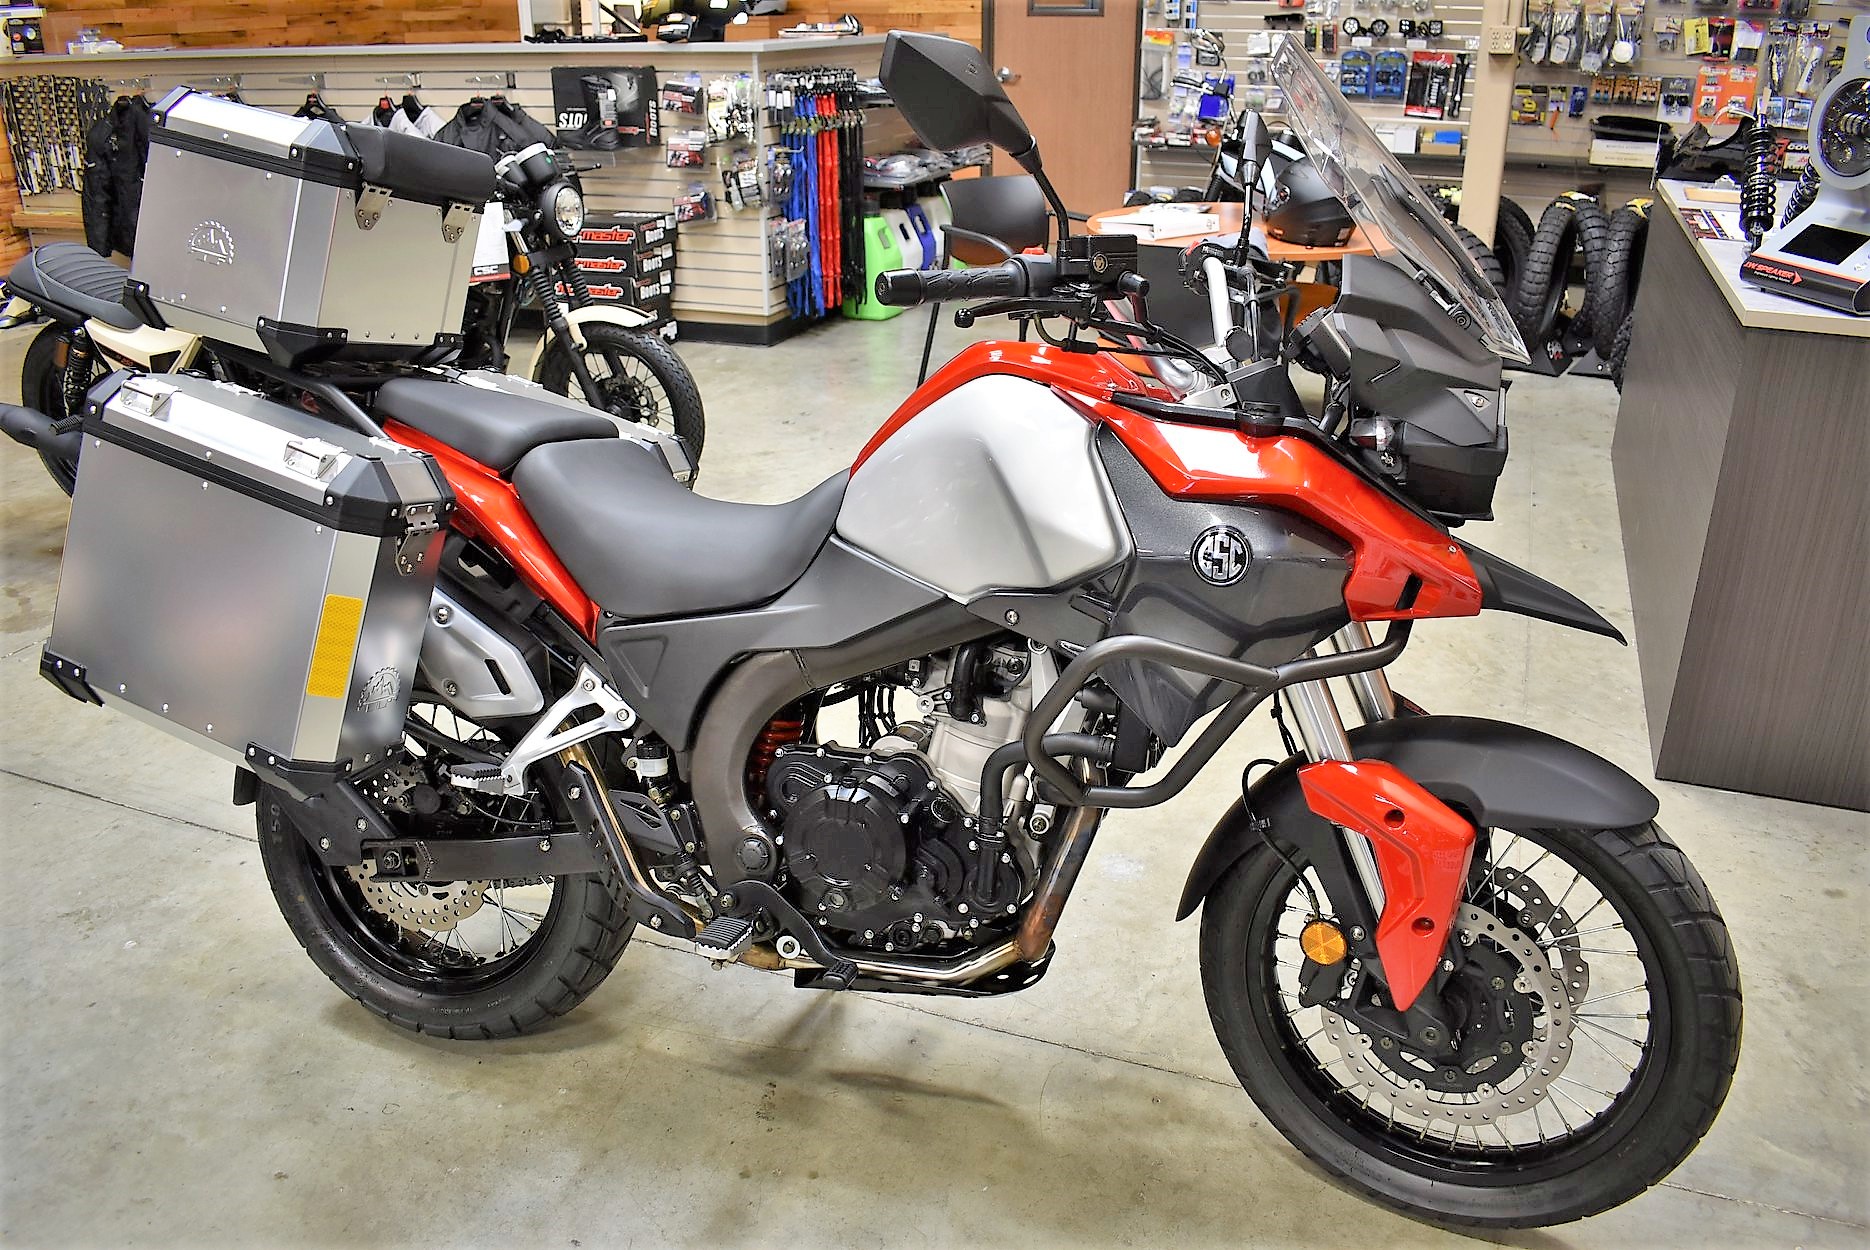 CSC RX4 Adventure dual sport motorcycle